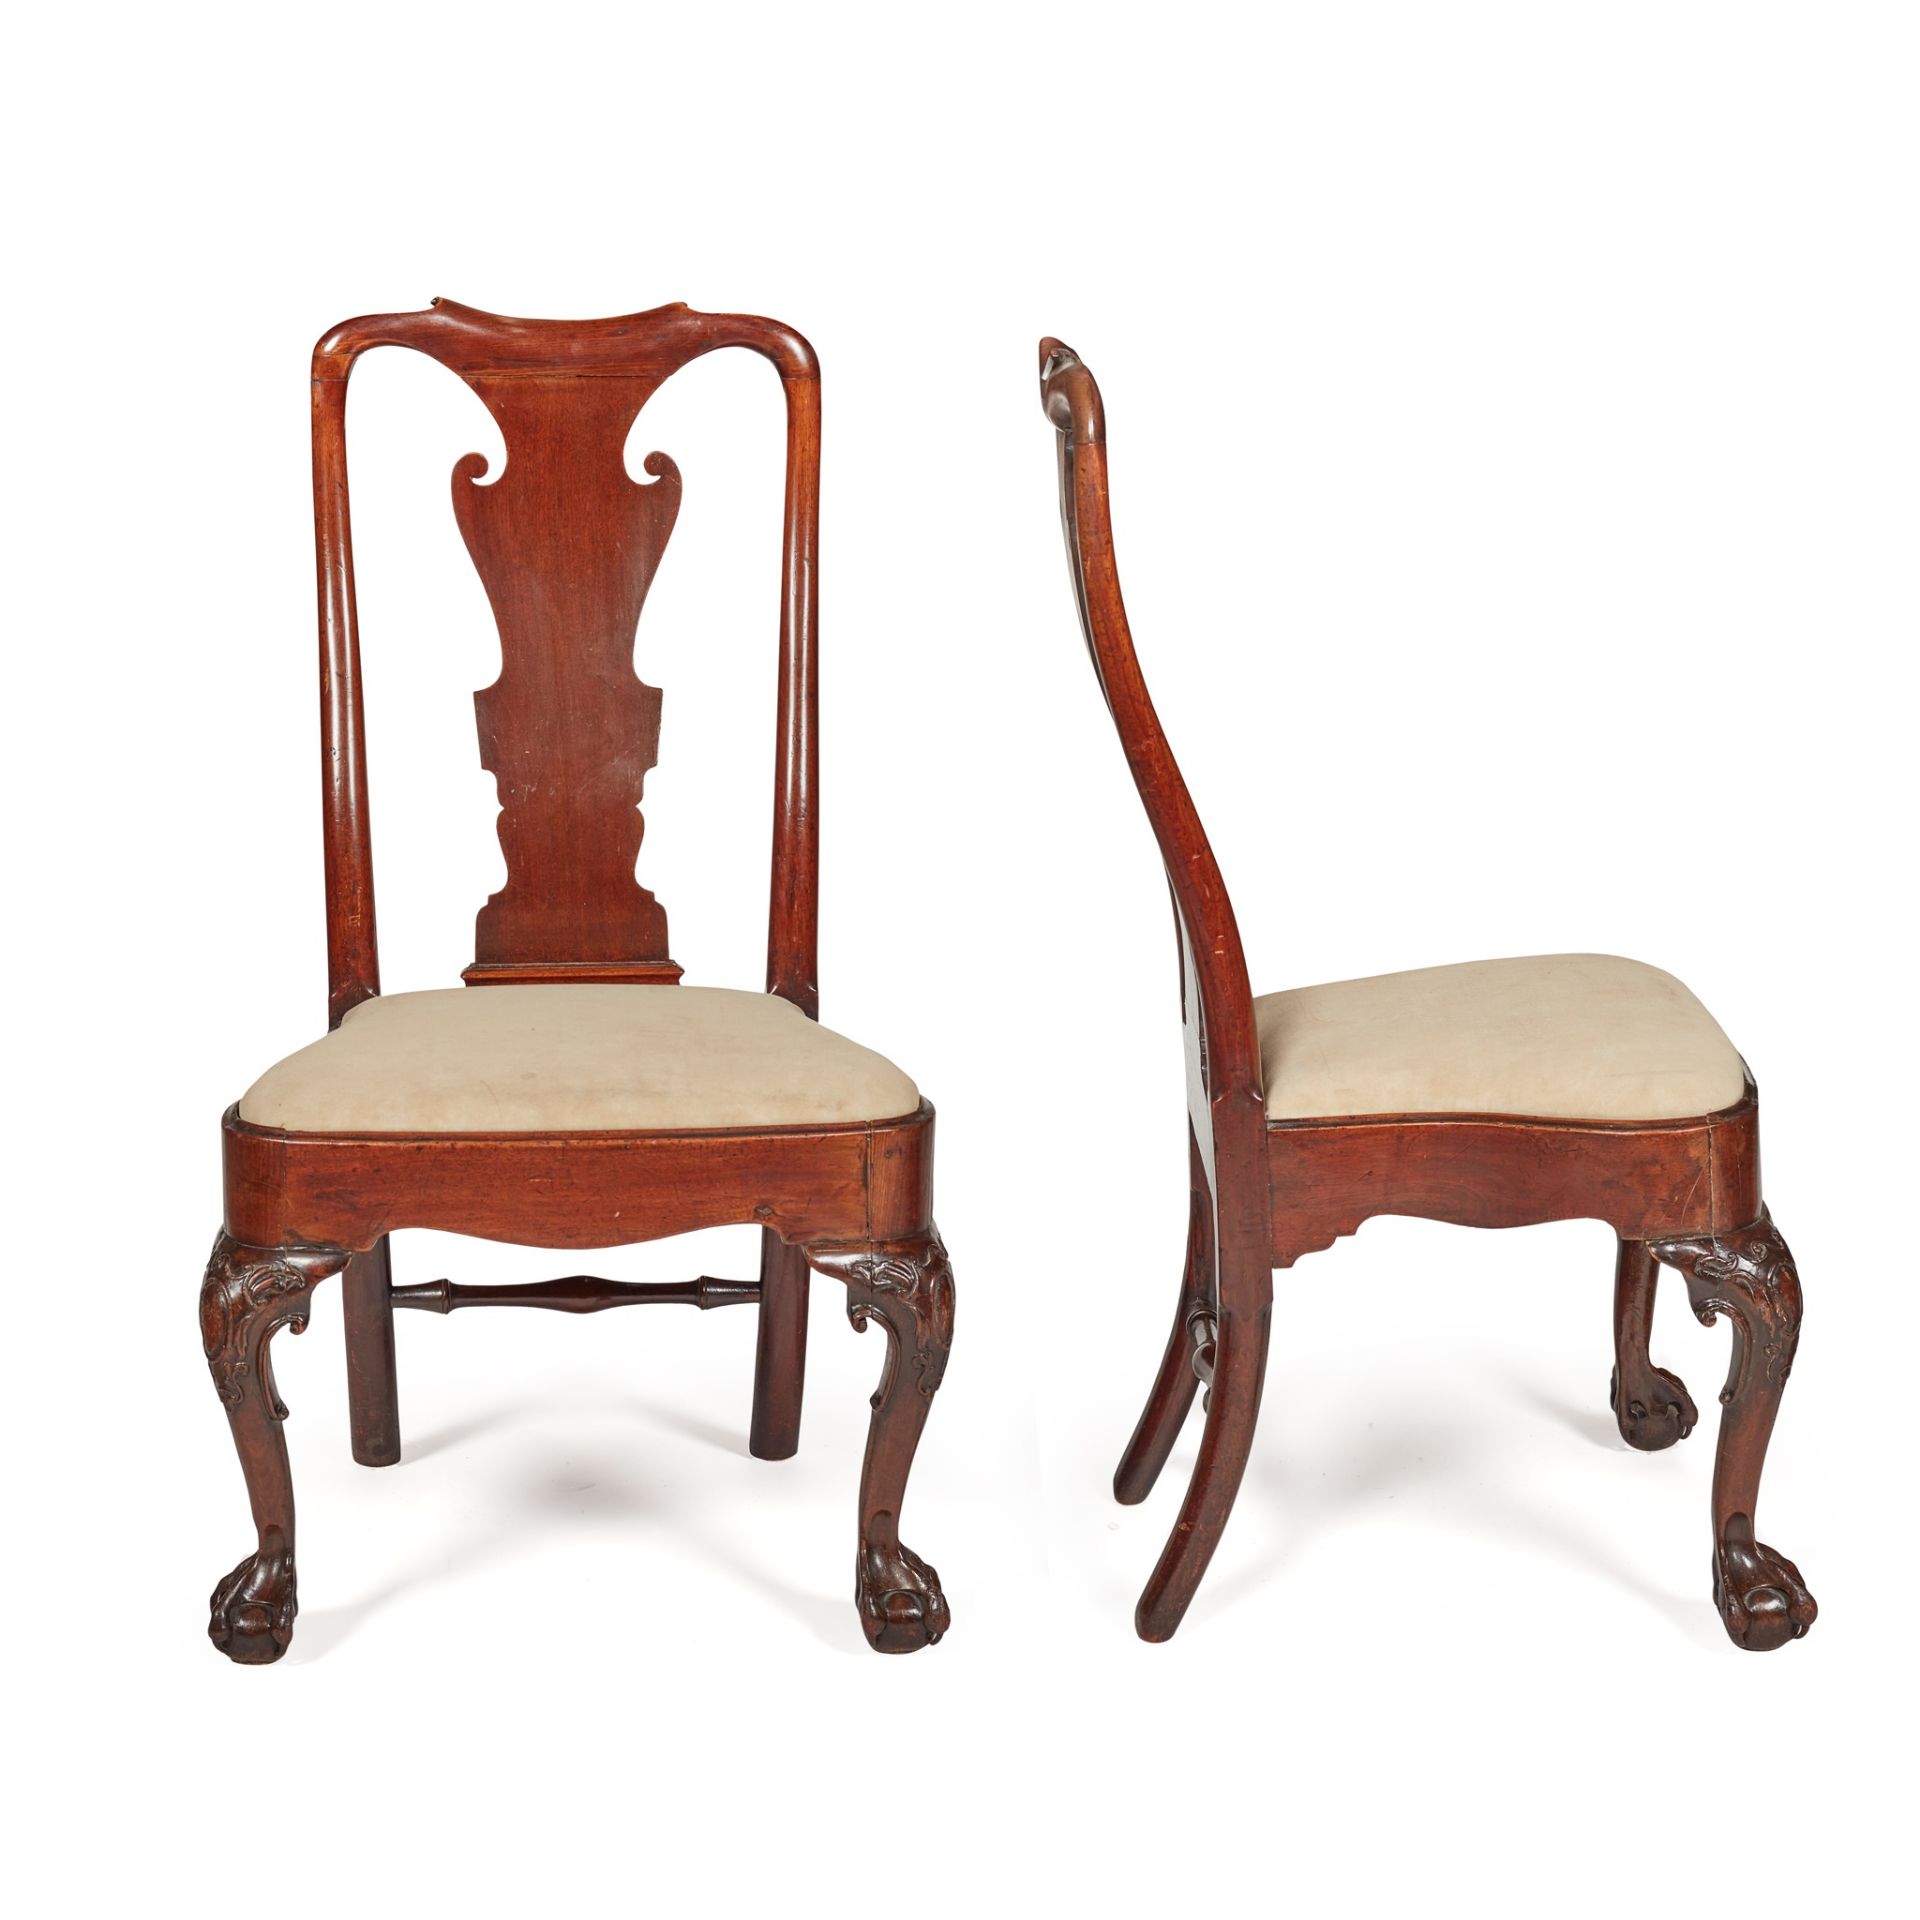 PAIR OF GEORGE II MAHOGANY SIDE CHAIRS 2ND QUARTER 18TH CENTURY - Image 2 of 2